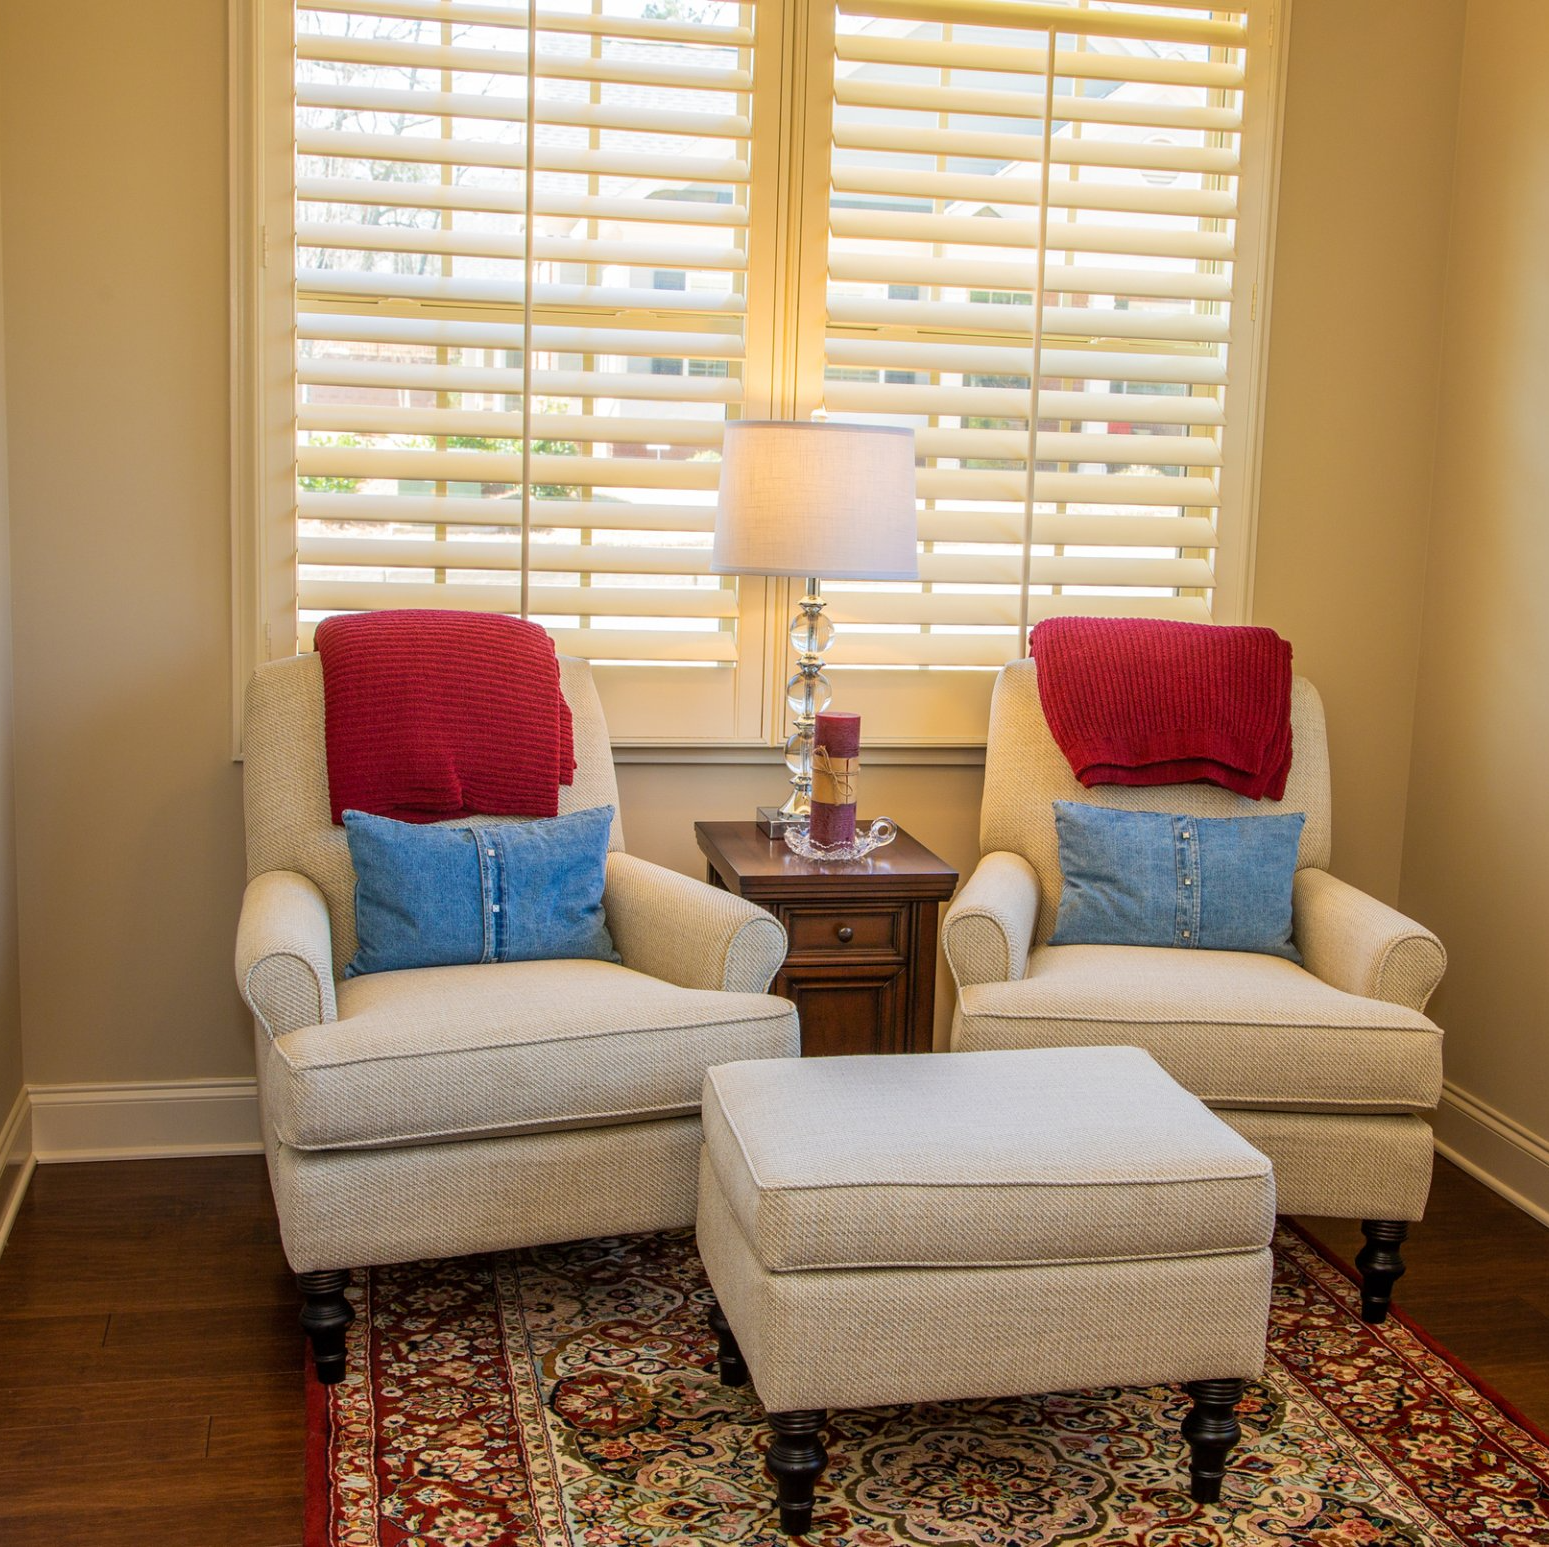 Lounge with footrest and two formal chairs on rug. Chairs have bright red and blue cushions. Open Plantation shutters in background.